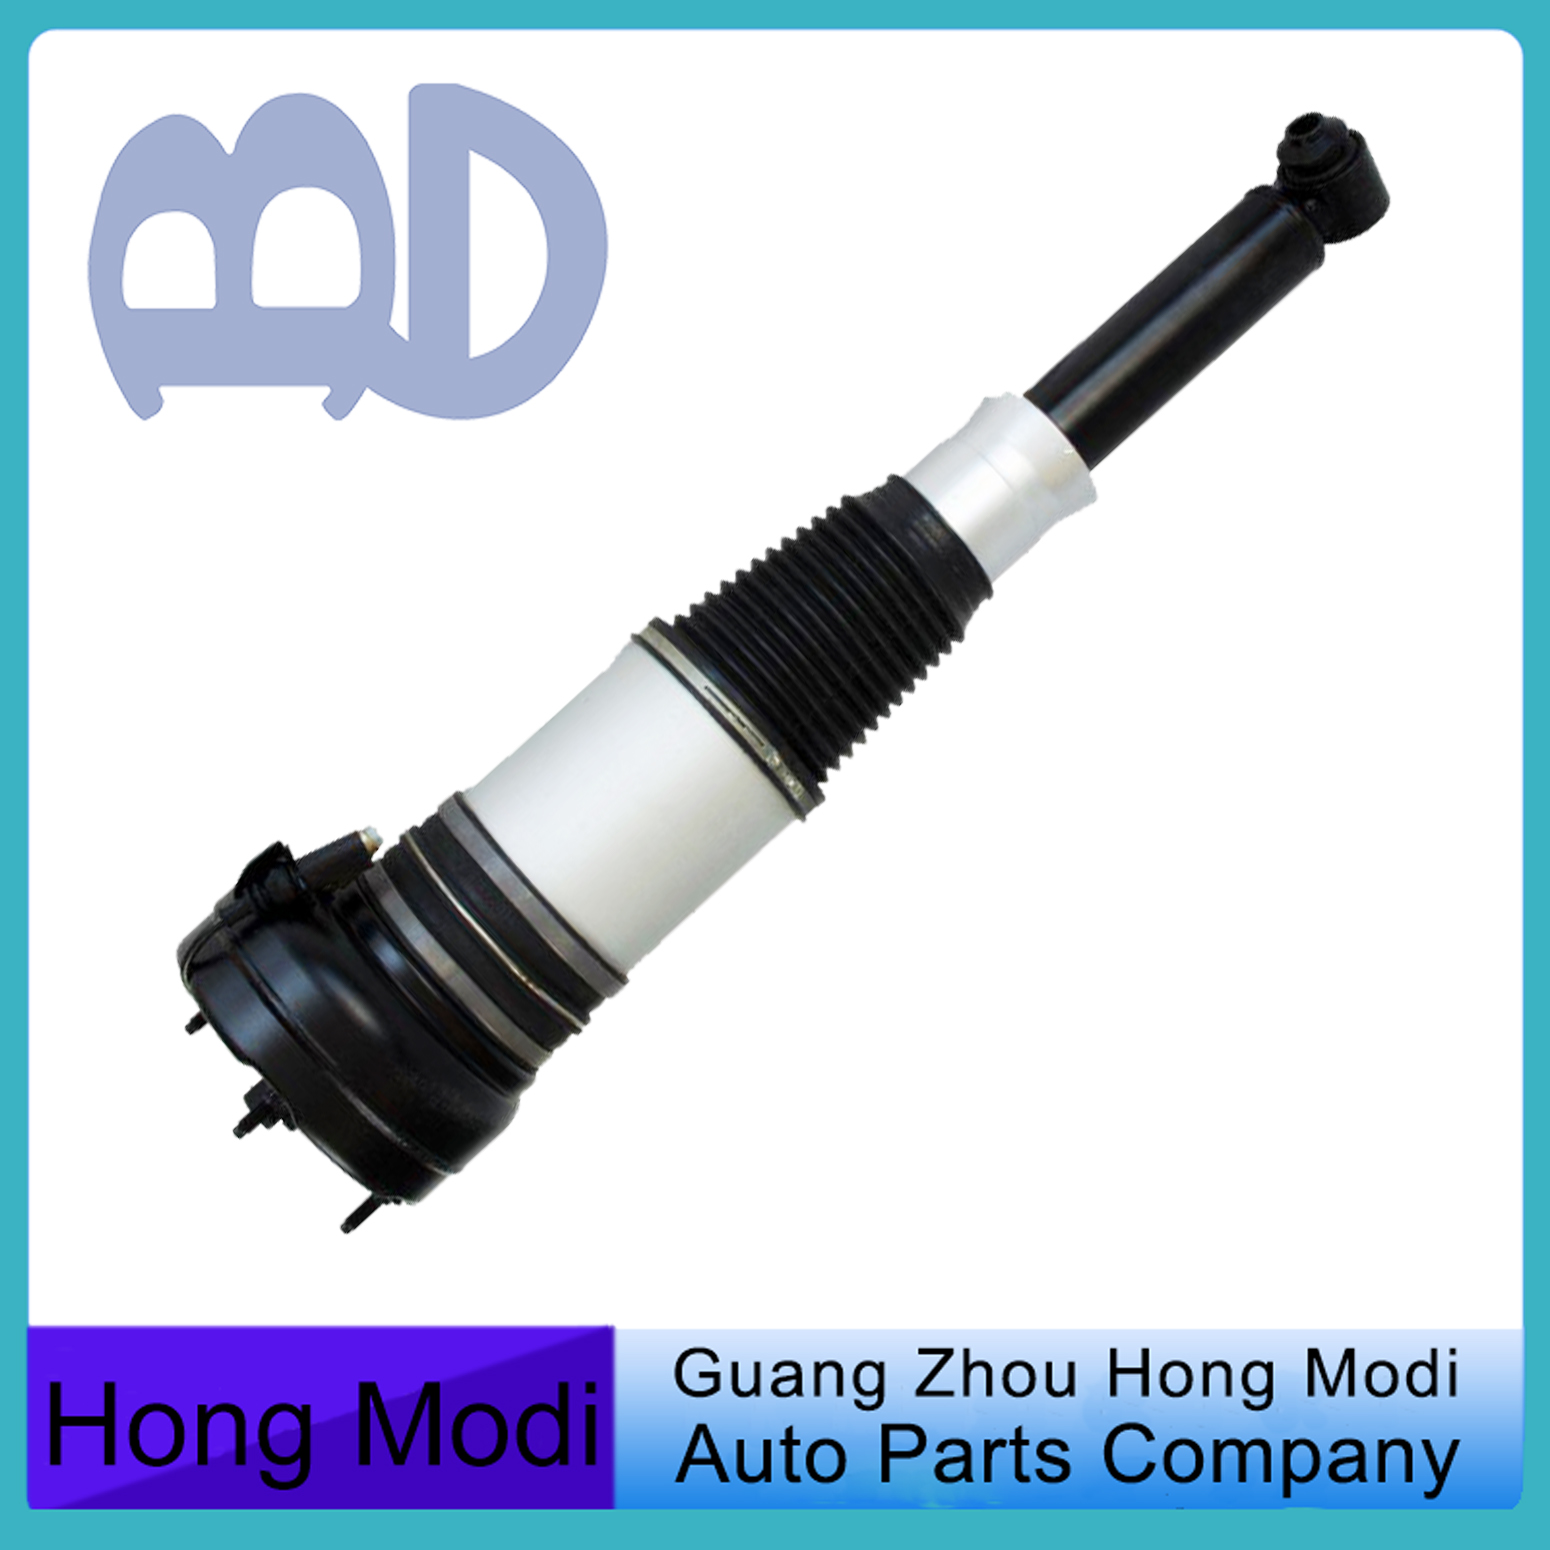 Audi A8 D4 Rear Air Suspension Shock Absorber System Bellows OE: 4H0616001M  4H0616002M